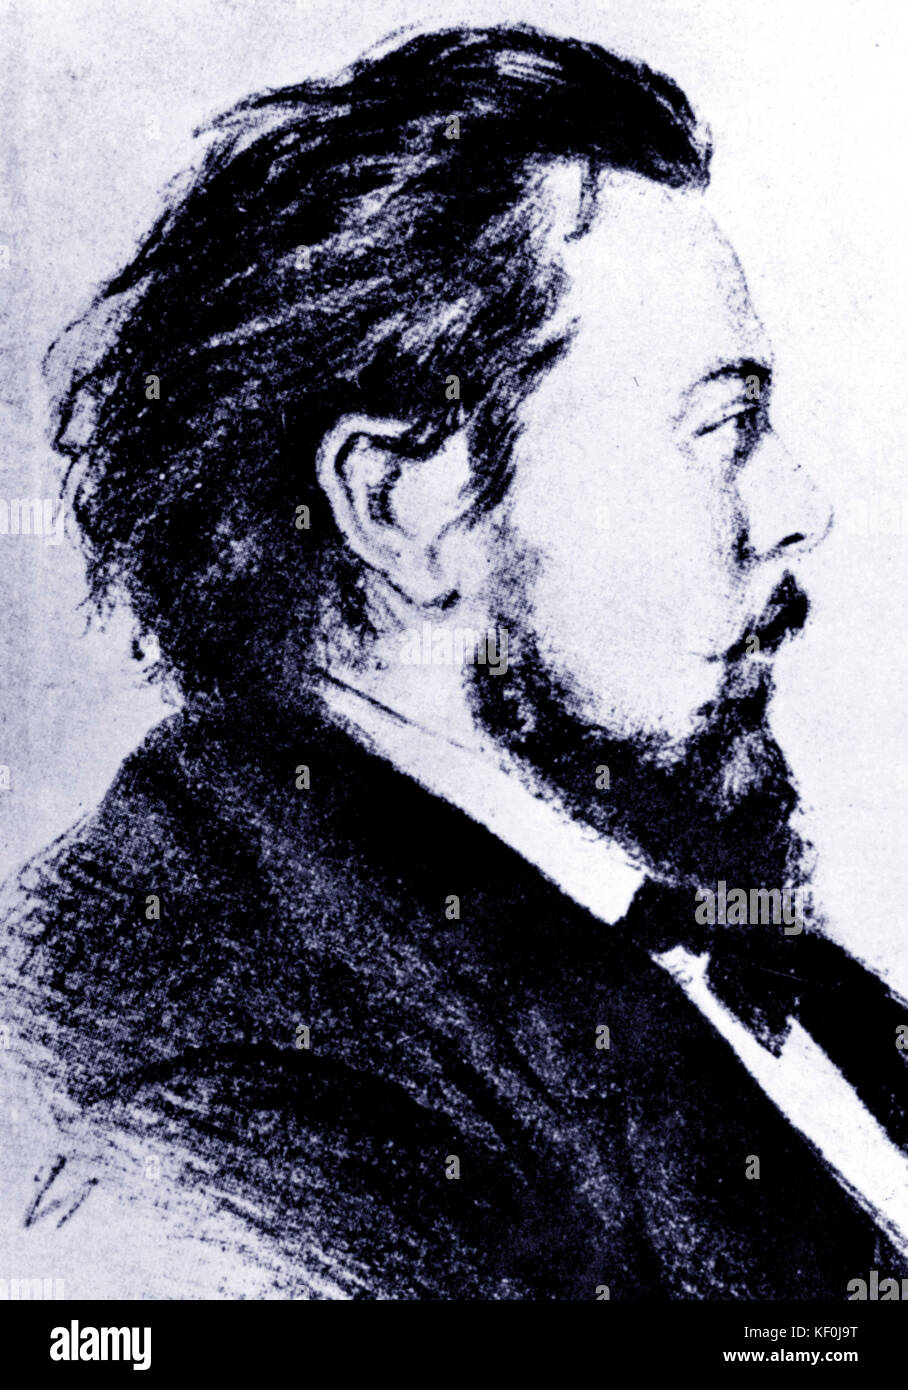 Modest Petrovich Mussorgsky portrait 1839-1881 Mussorgsky. Russian composer. Drawing  done 1876 by S.F.Alexandrovsky, born in Riga, 25-12-1842; studied at St. Petersburg. One of the Mighty Five Stock Photo